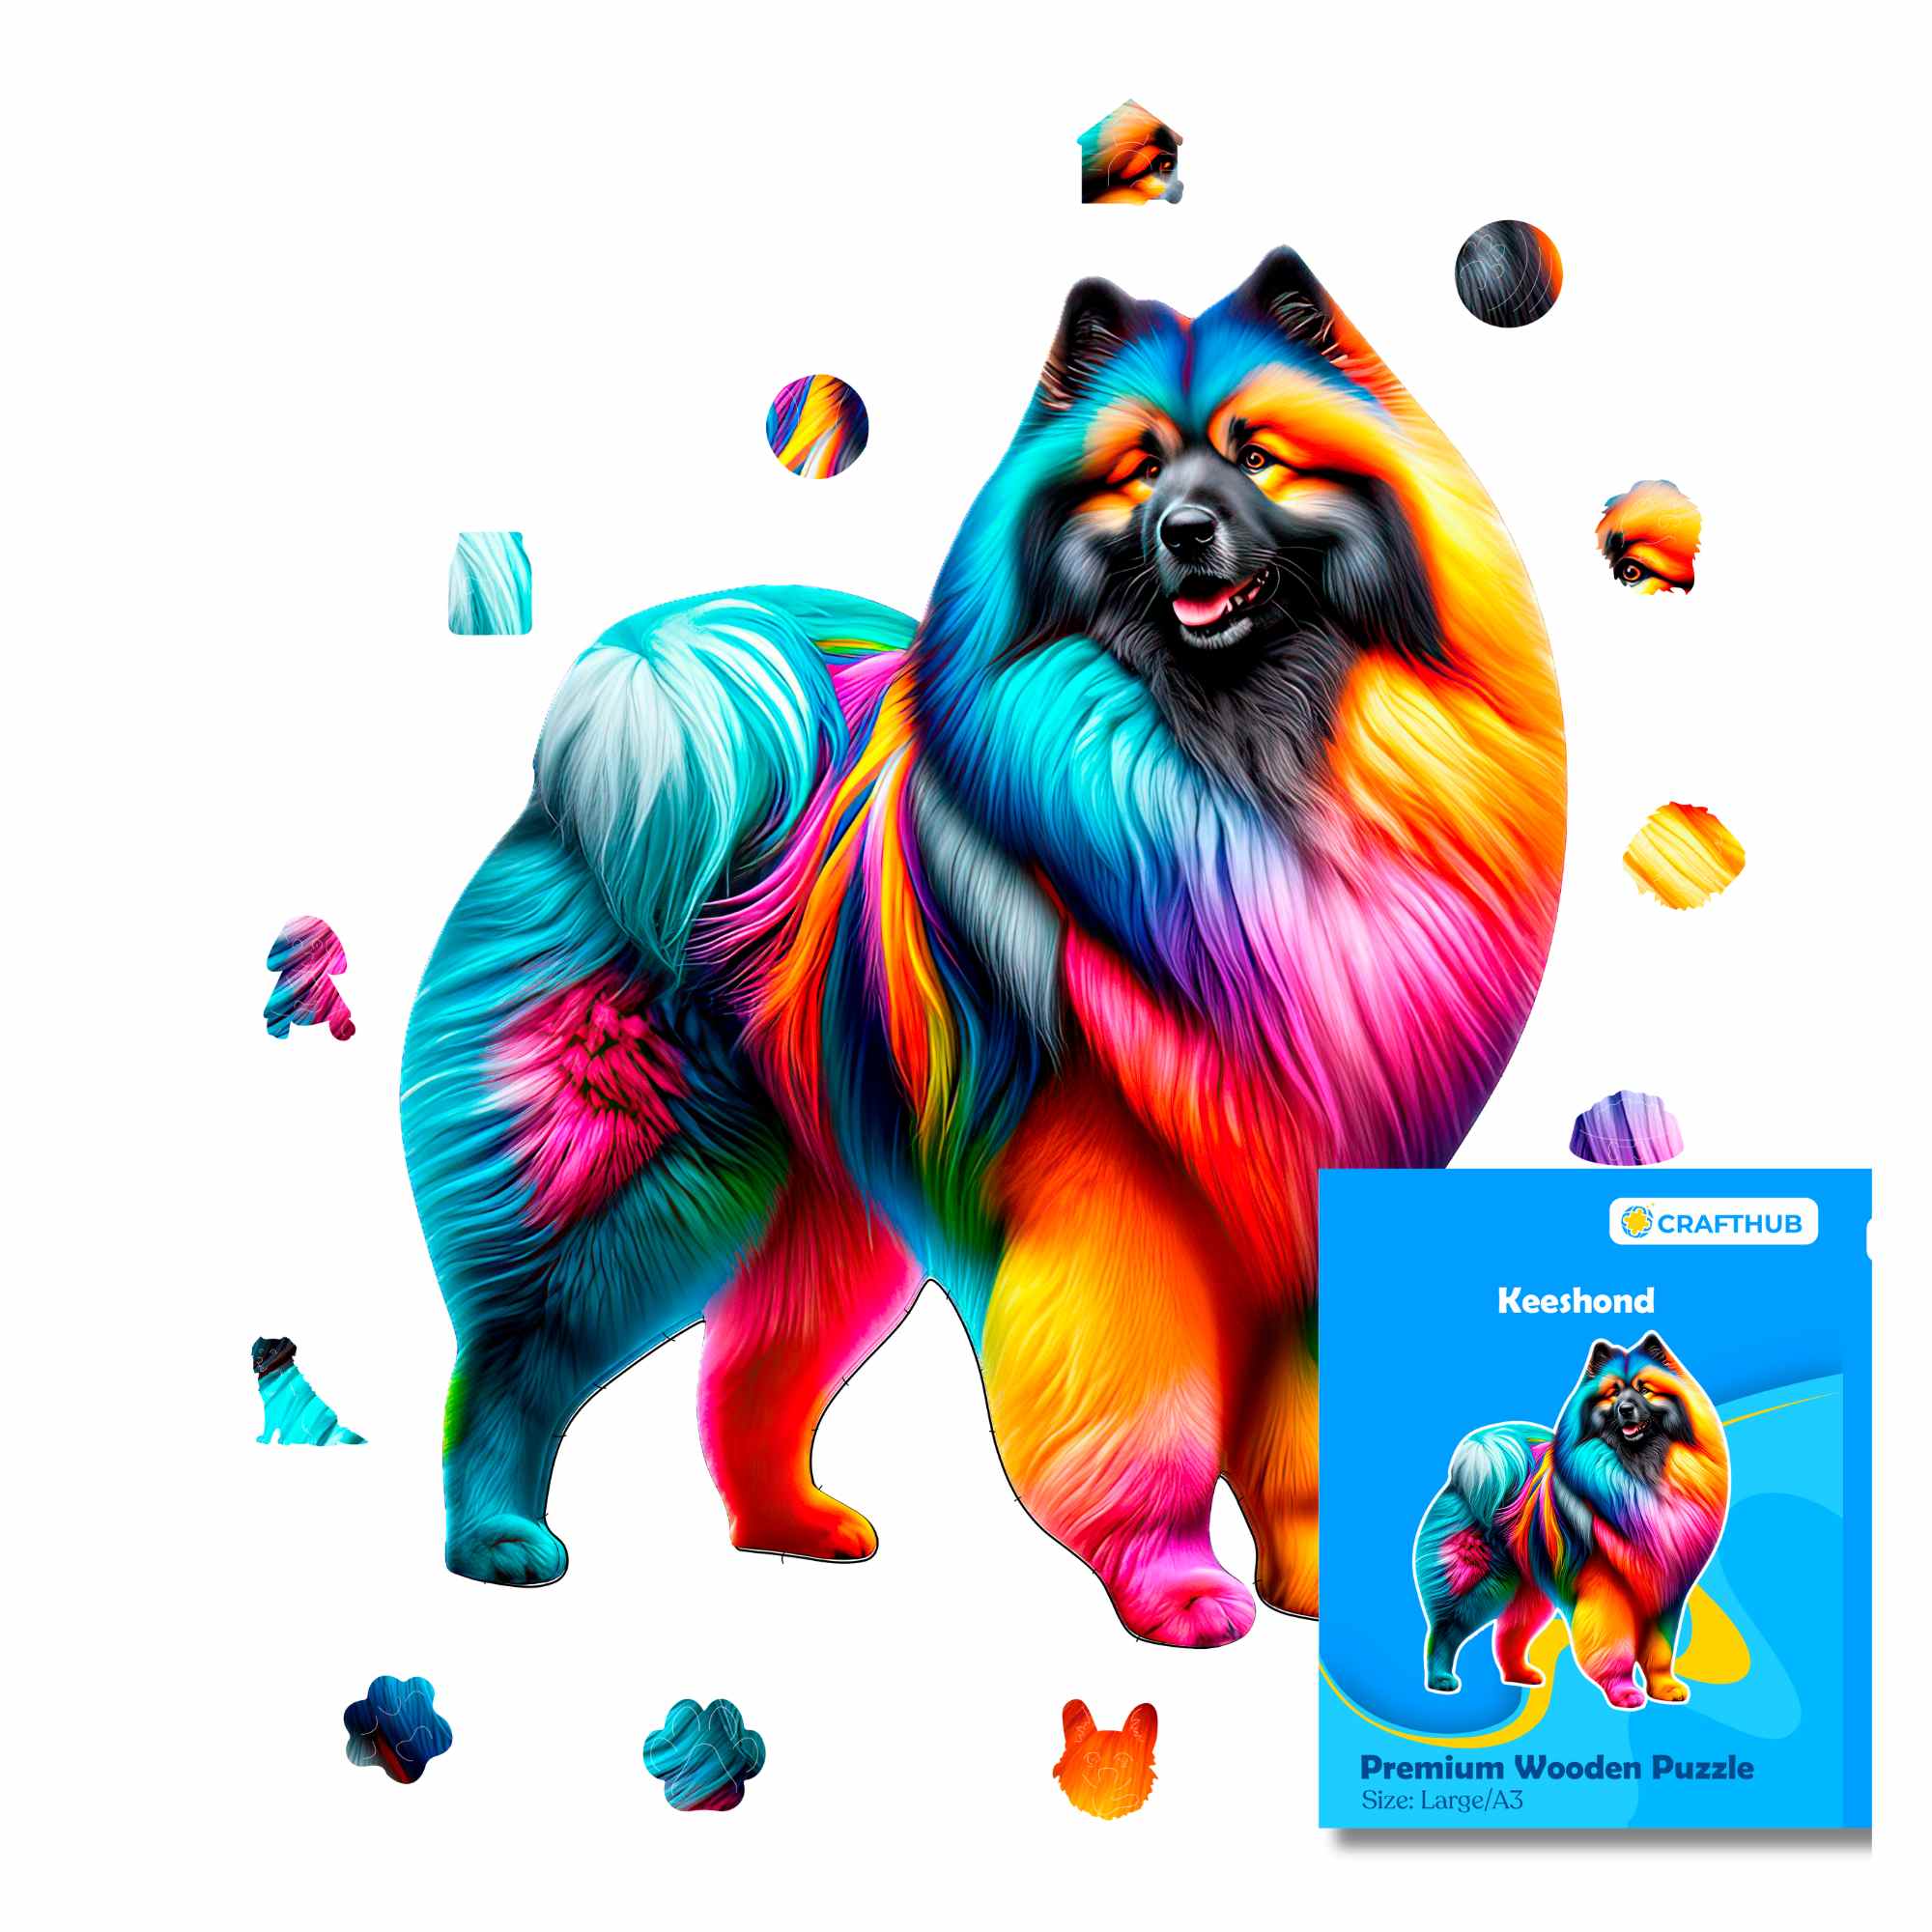 Animal Jigsaw Puzzle > Wooden Jigsaw Puzzle > Jigsaw Puzzle A4 Keeshond Dog - Jigsaw Puzzle